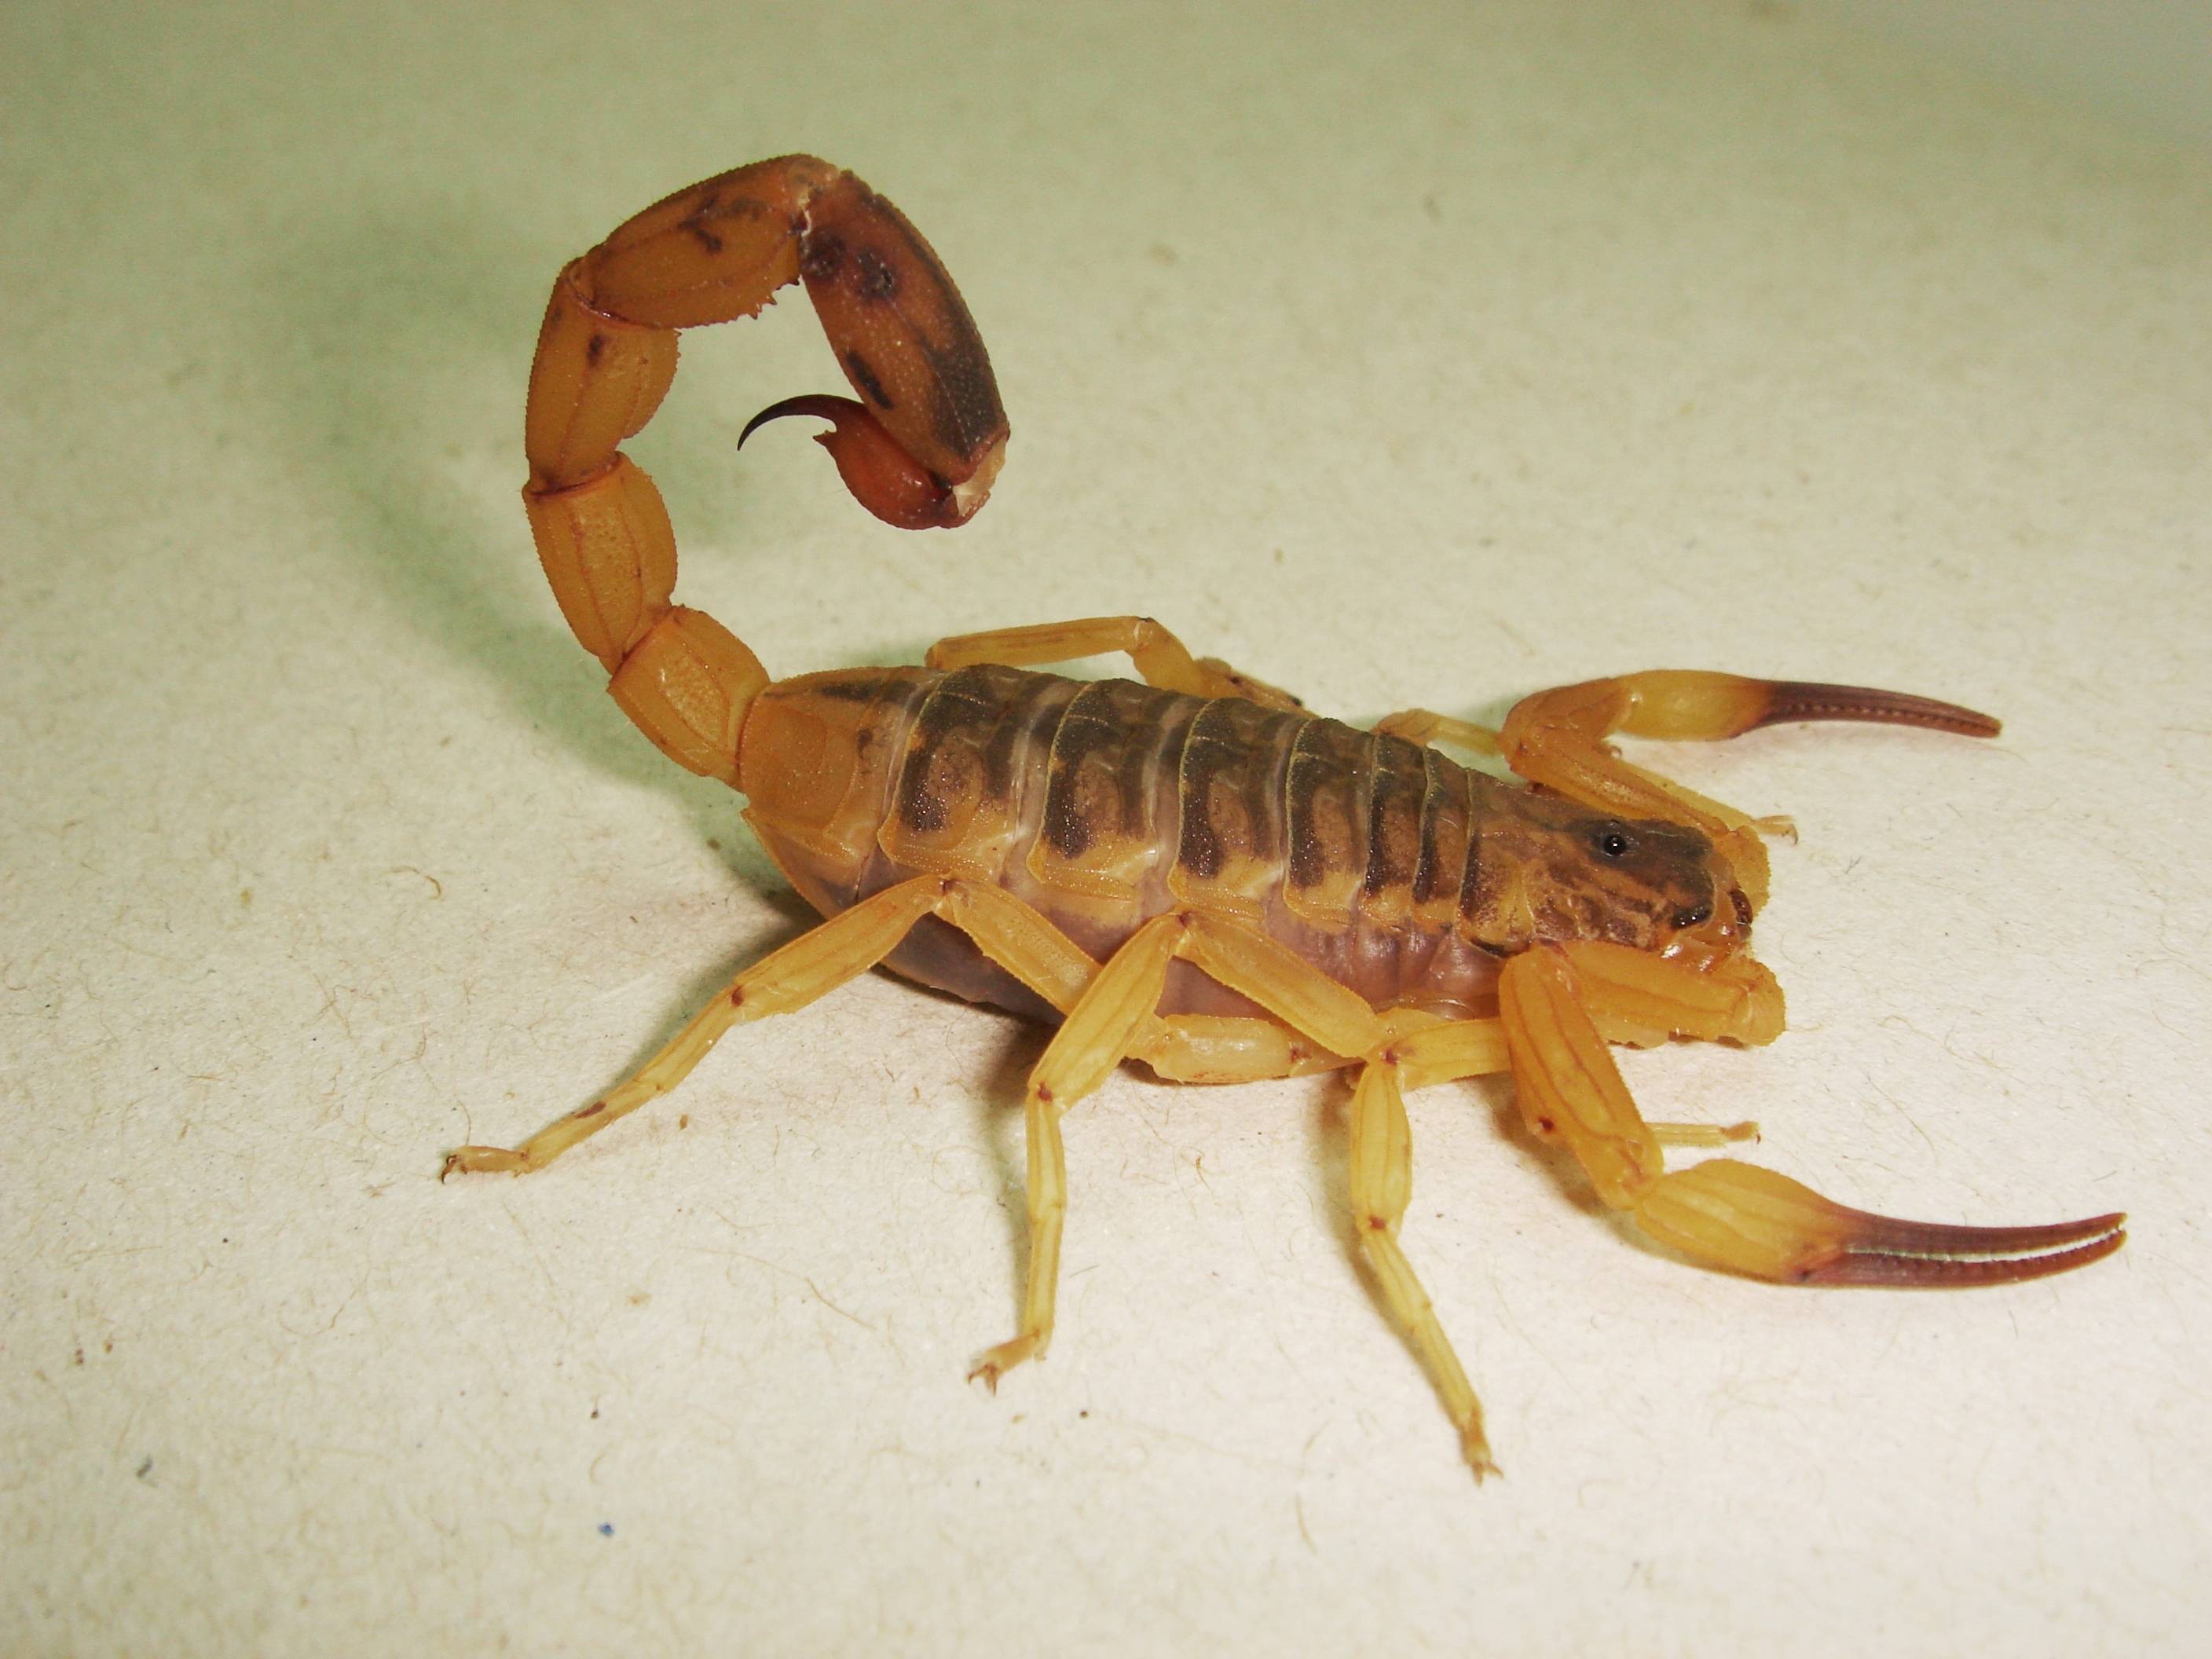 Inflammation Is Likely The Most Lethal Part Of Scorpion Stings ...